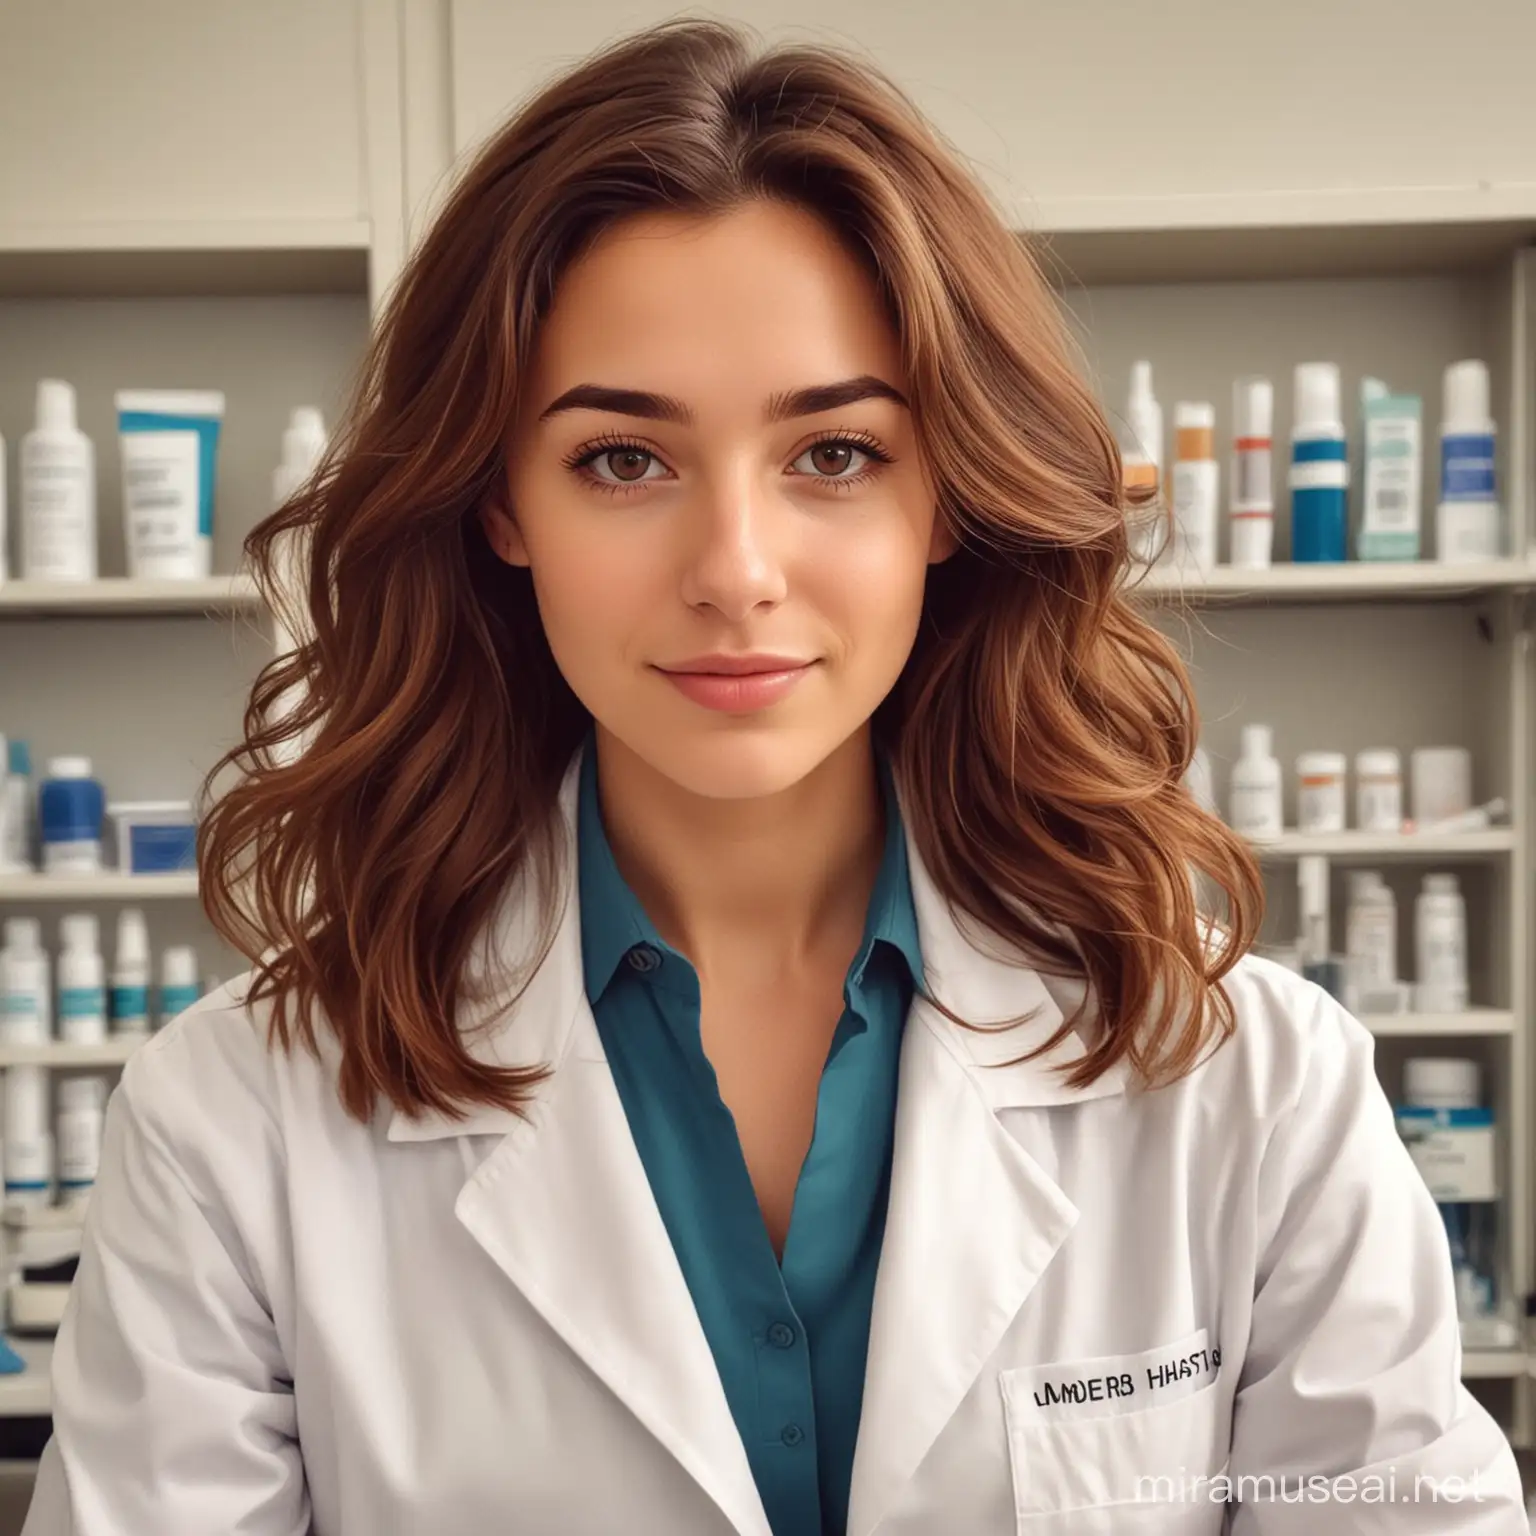 Draw me as a female scientist with wavy brown hair and brown eyes in a Laboratory Pharmacist medicine